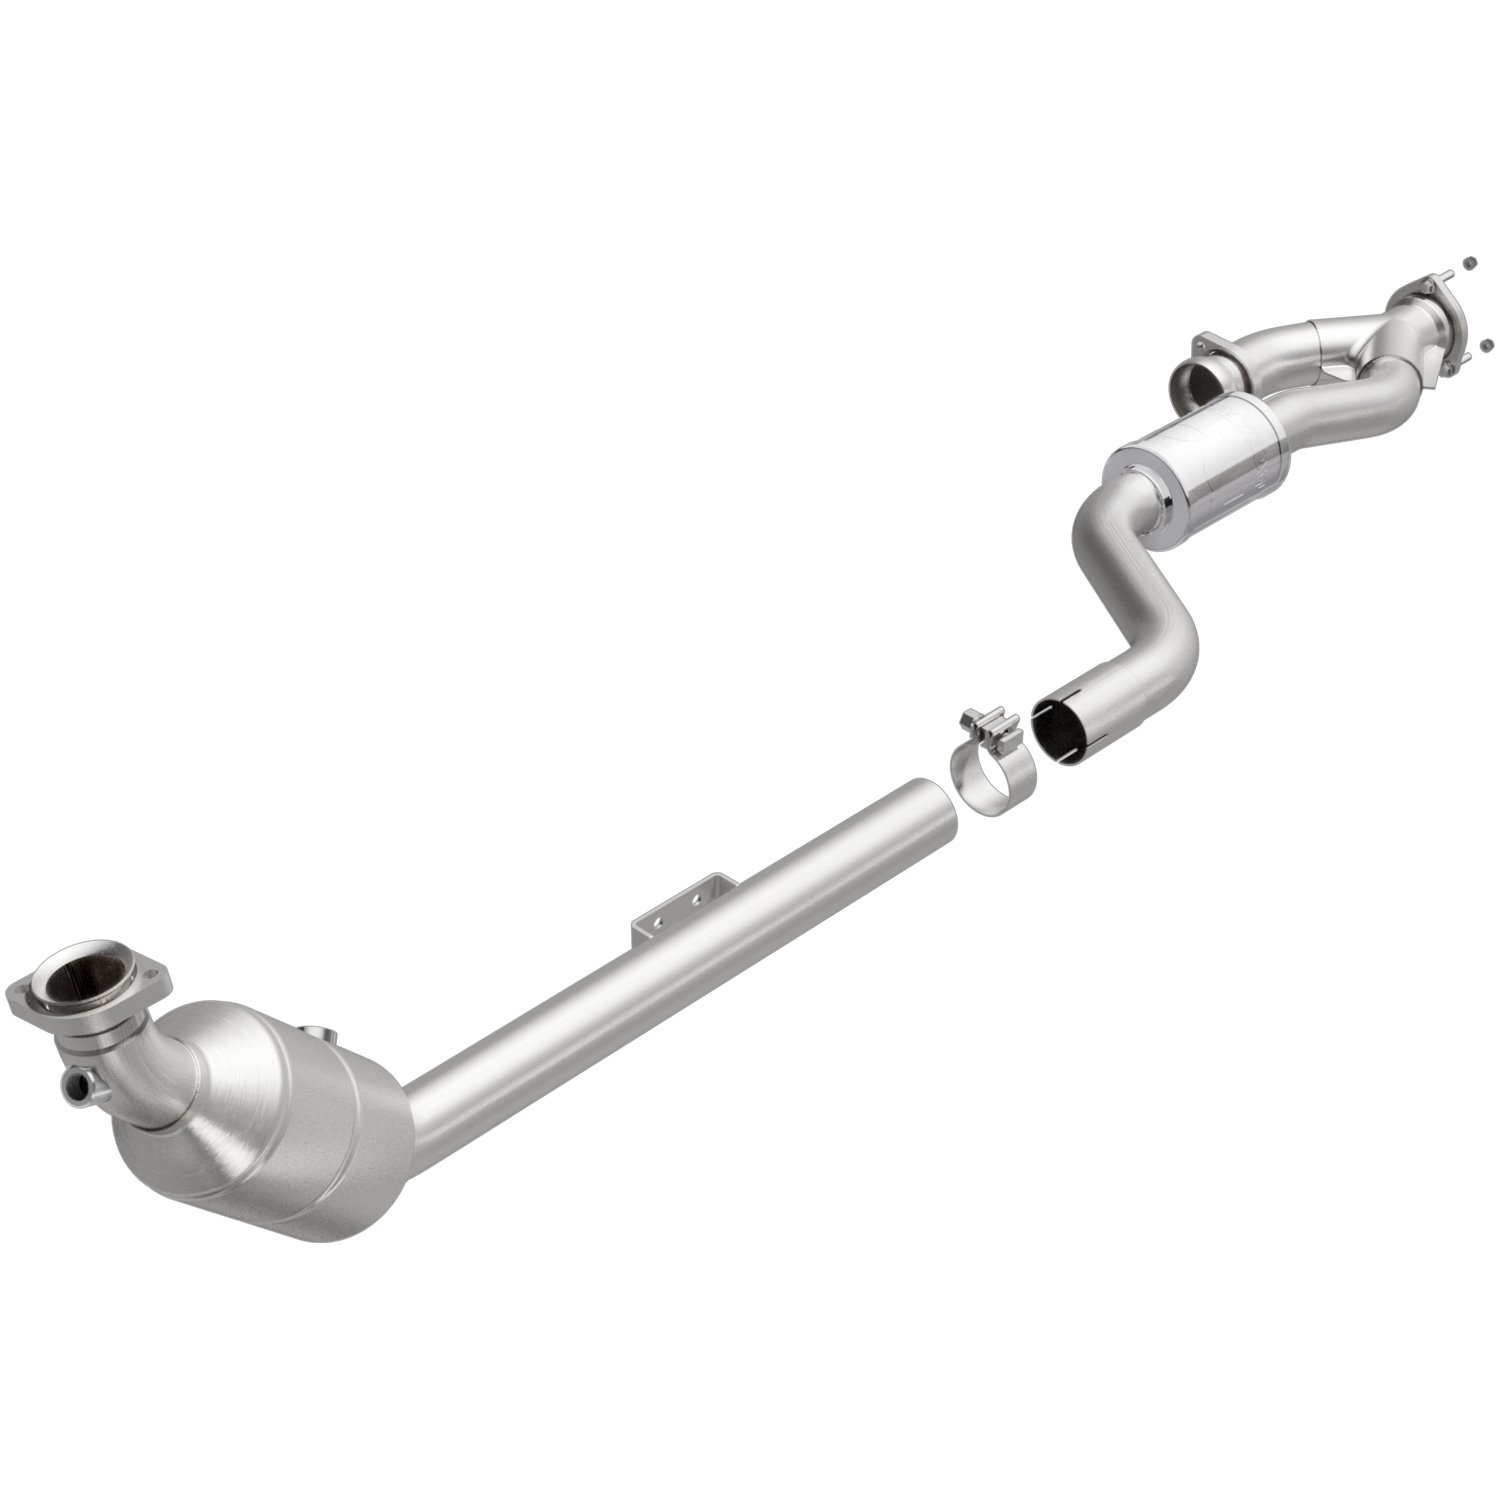 HM Grade Federal / EPA Compliant Direct-Fit Catalytic Converter 24264